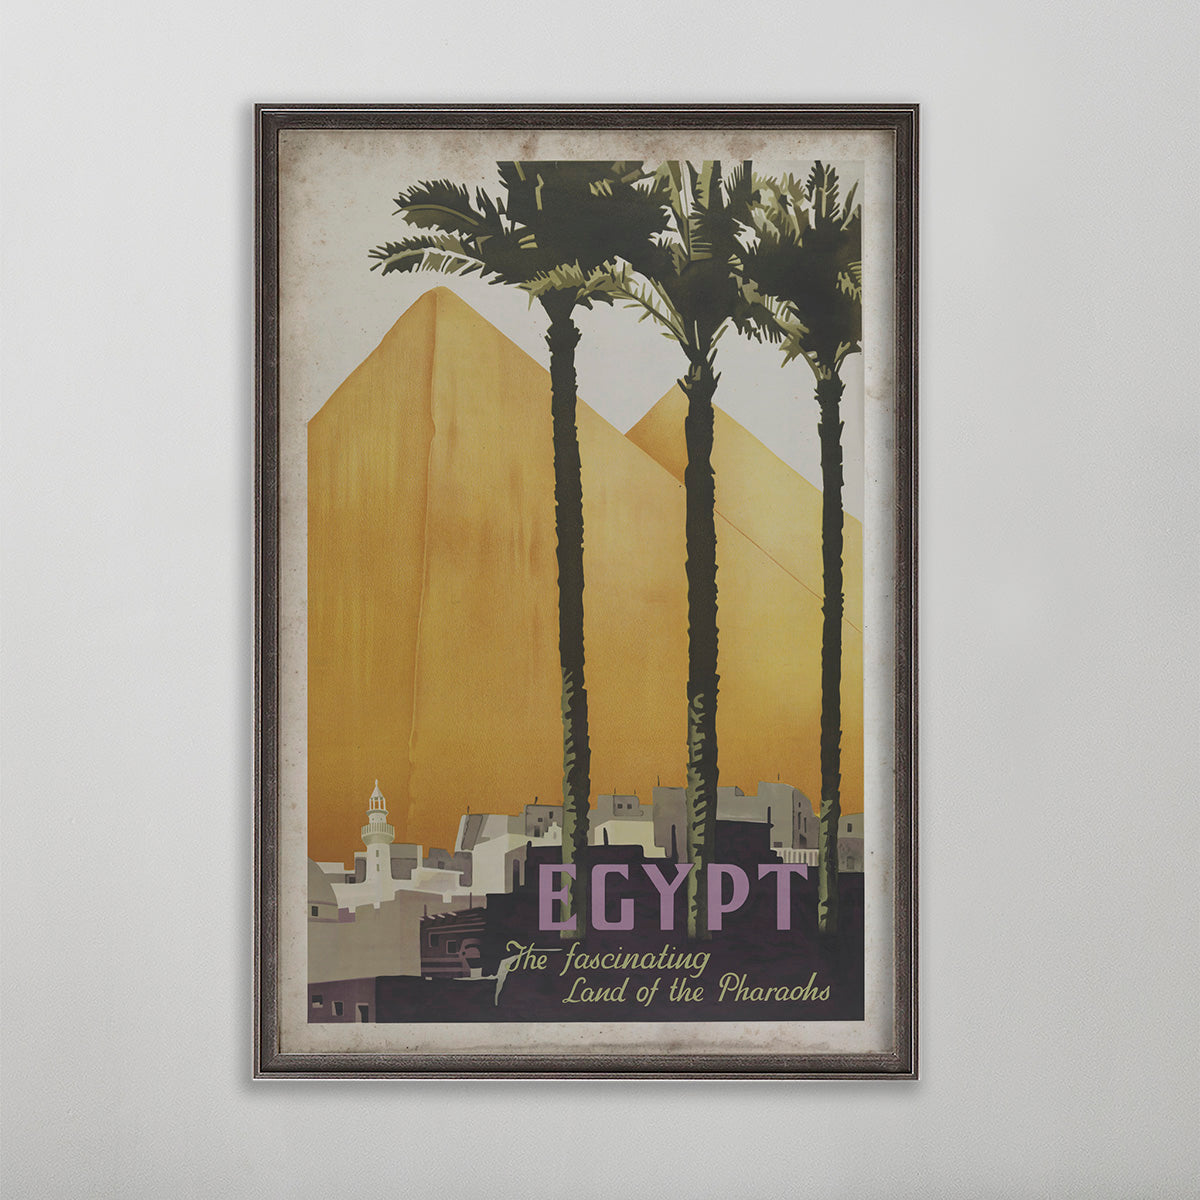 Egypt vintage travel poster. Pyramids with palm trees.